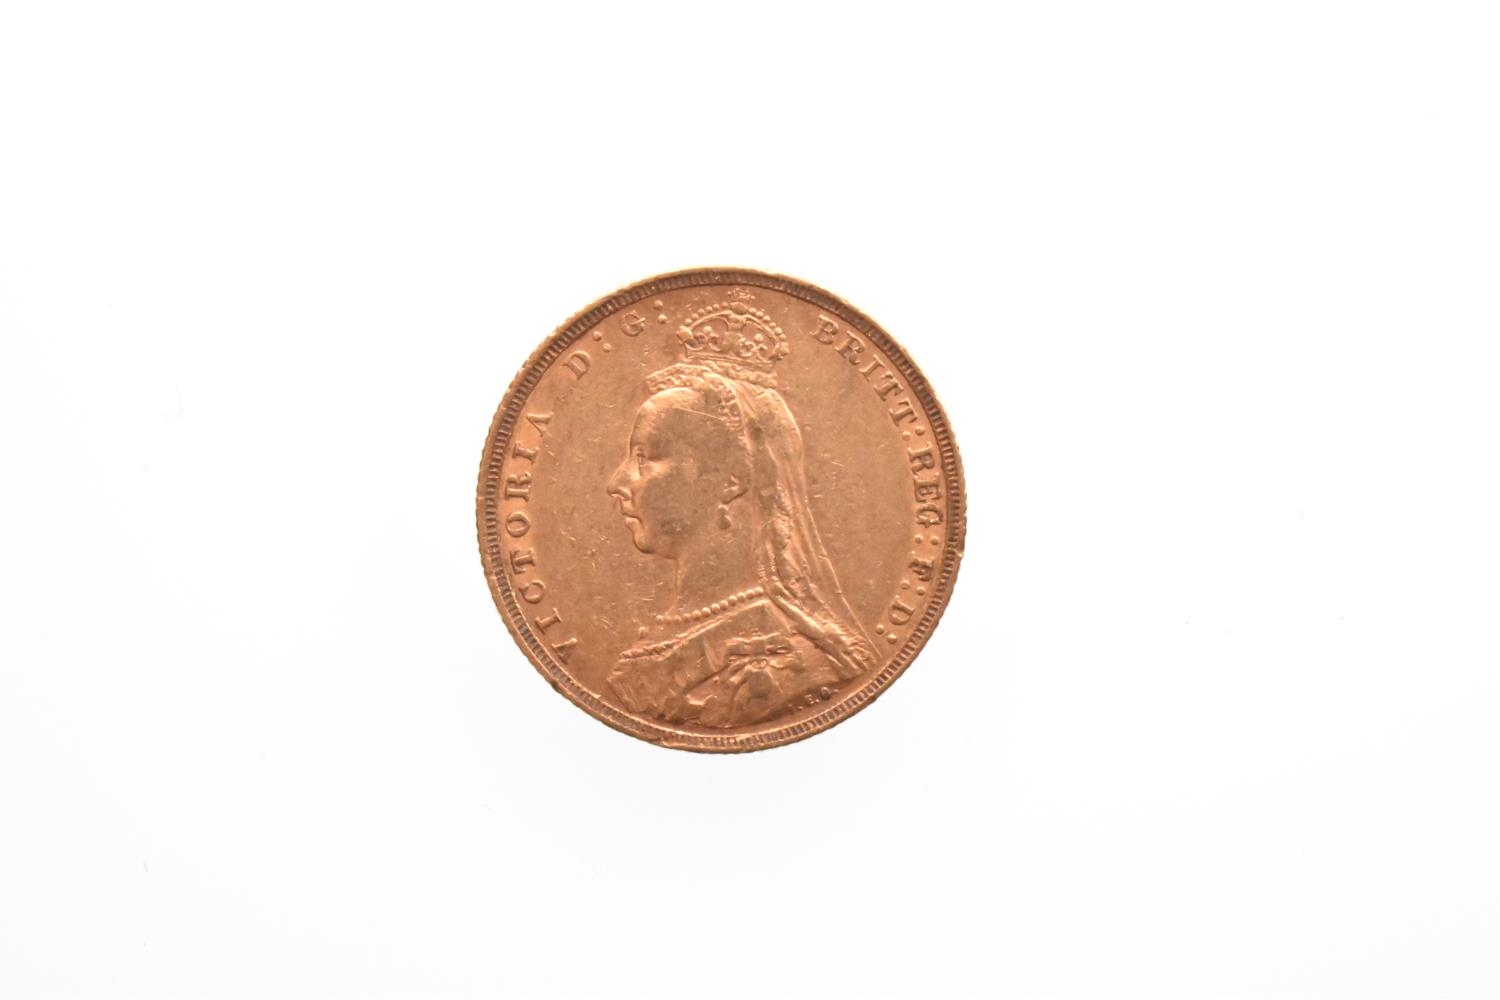 United Kingdom - Victoria (1837-1901), Gold Sovereign, 'Jubilee Bust', dated 1892, London mint, - Image 2 of 2